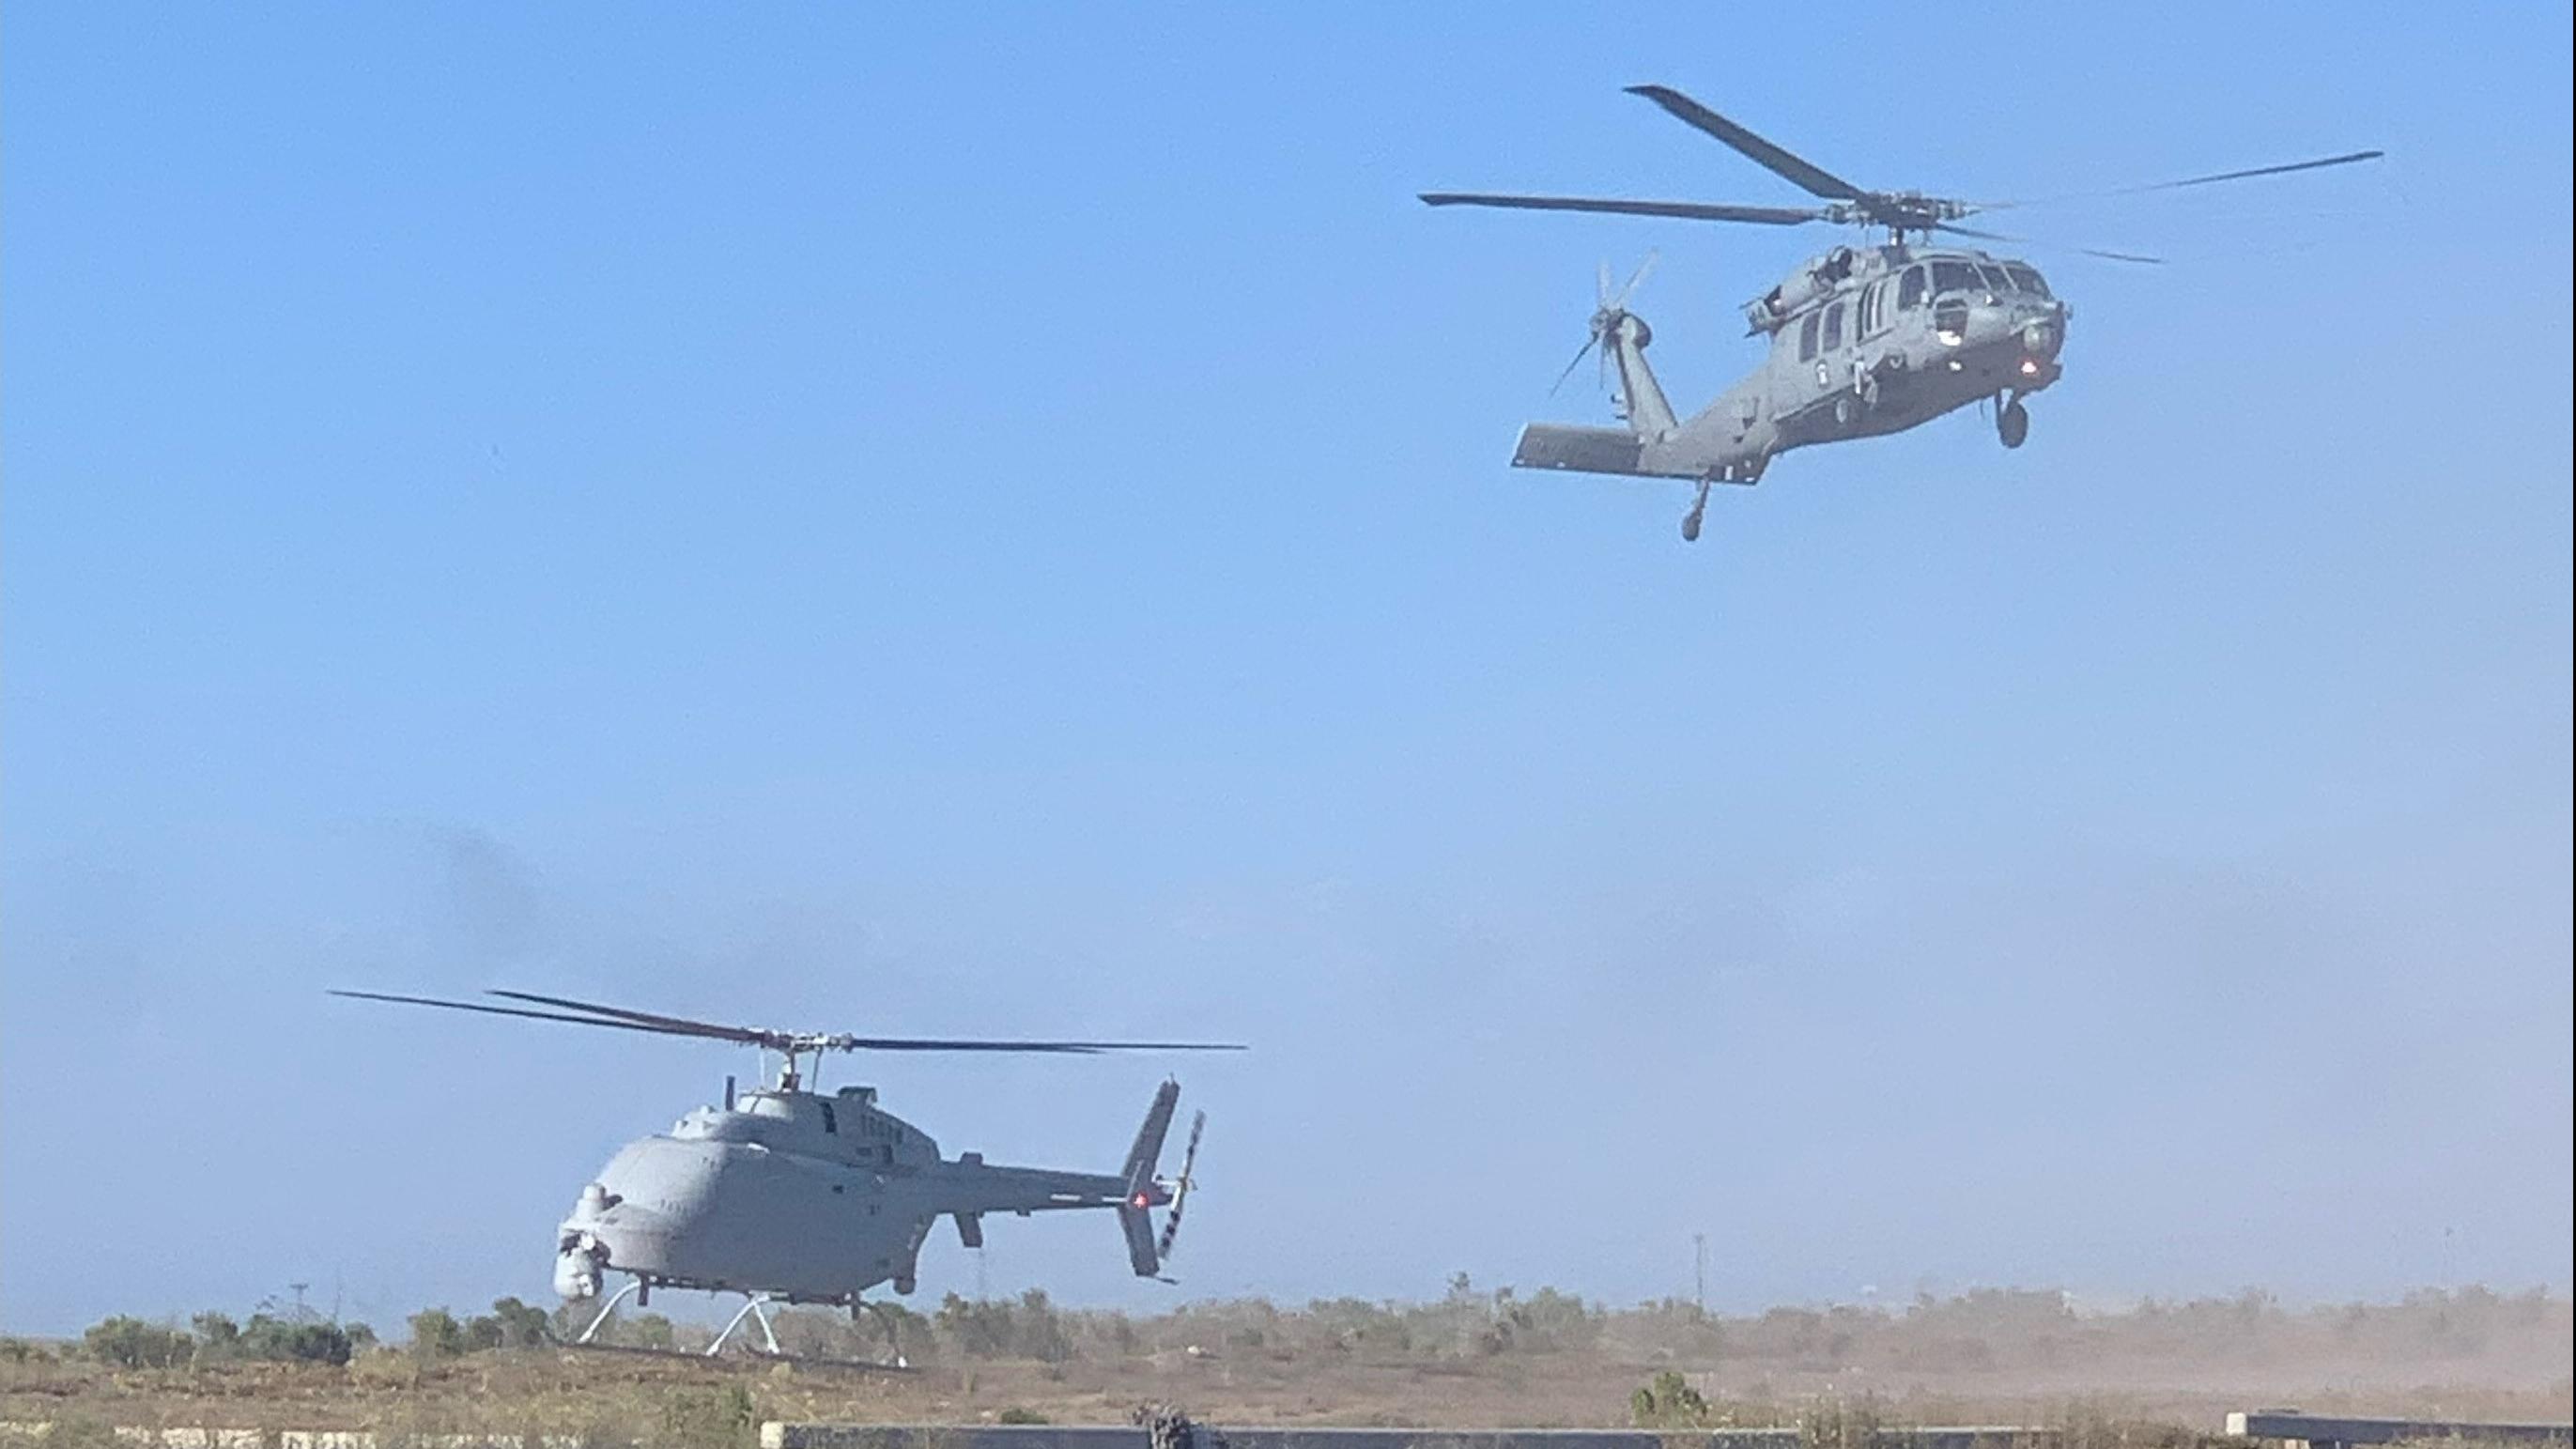 MQ-8 Fire Scout demonstrates expeditionary capability during Navy exercise | NAVAIR